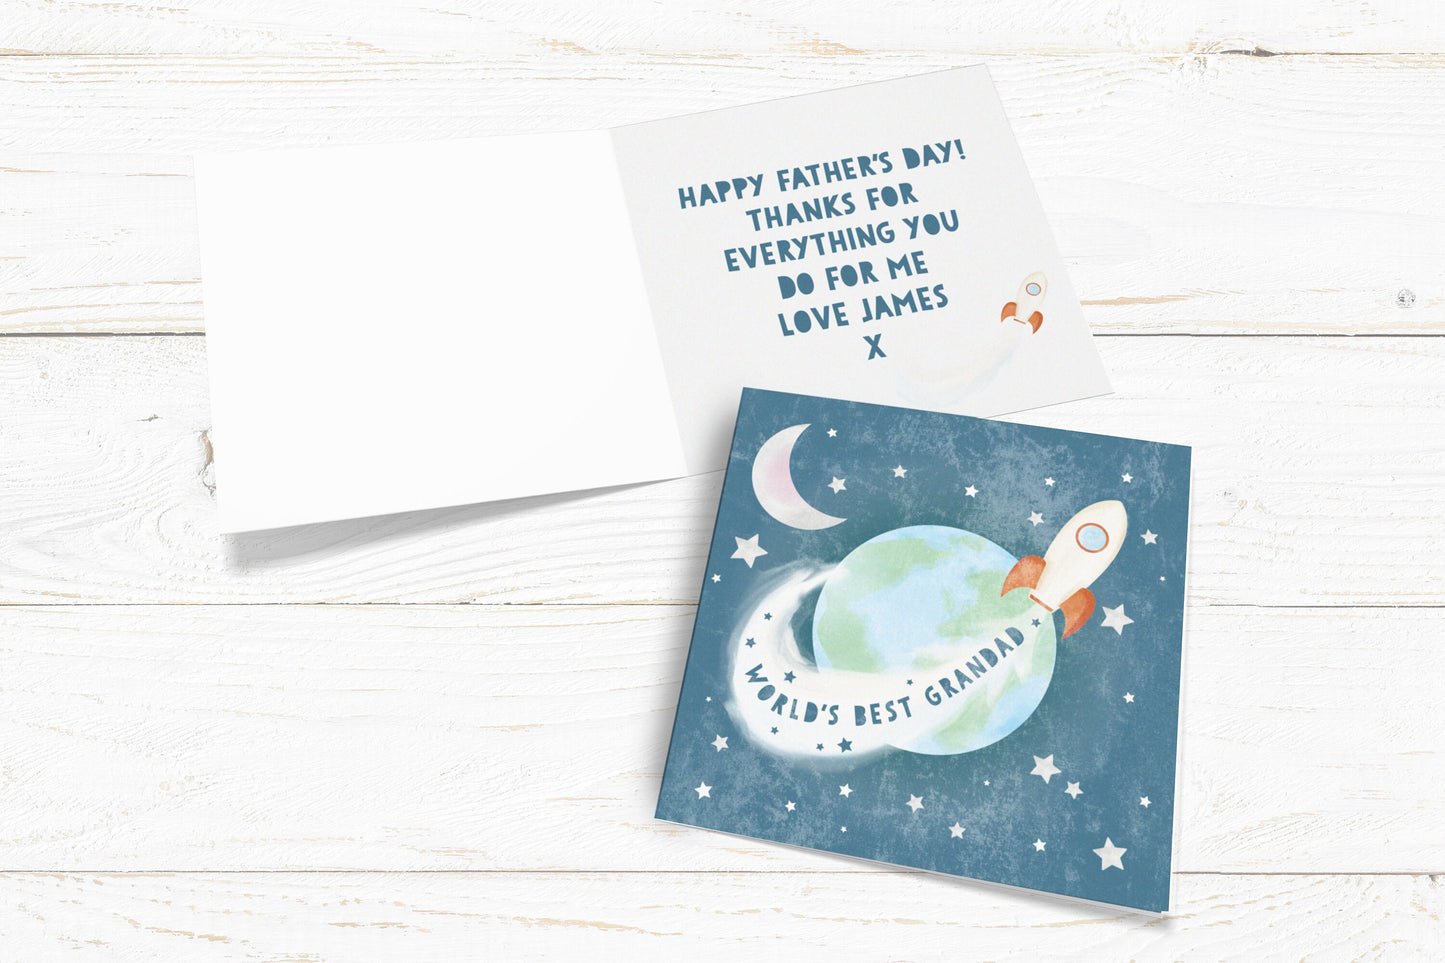 World's Best Dad, Grandad, Son, Uncle, Nephew, Step-dad Rocket Ship Card. Personalised Father's Day Card. Cute space. Send Direct Option.